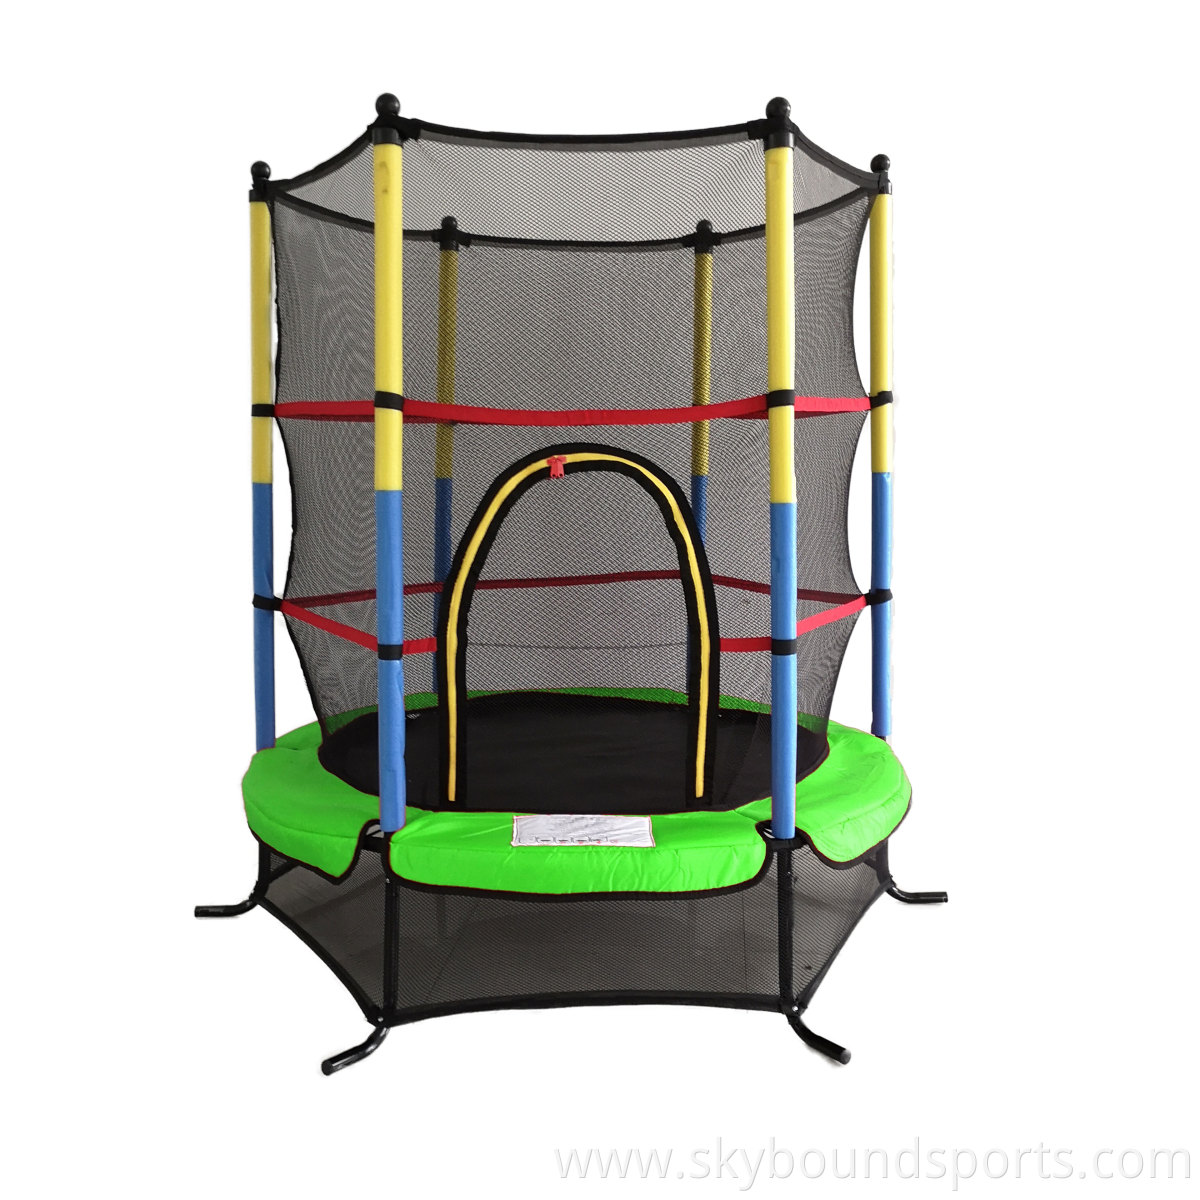 Trampoline for Kids with Net - 5 FT Indoor Outdoor Toddler Trampoline with Safety Enclosure for Fun